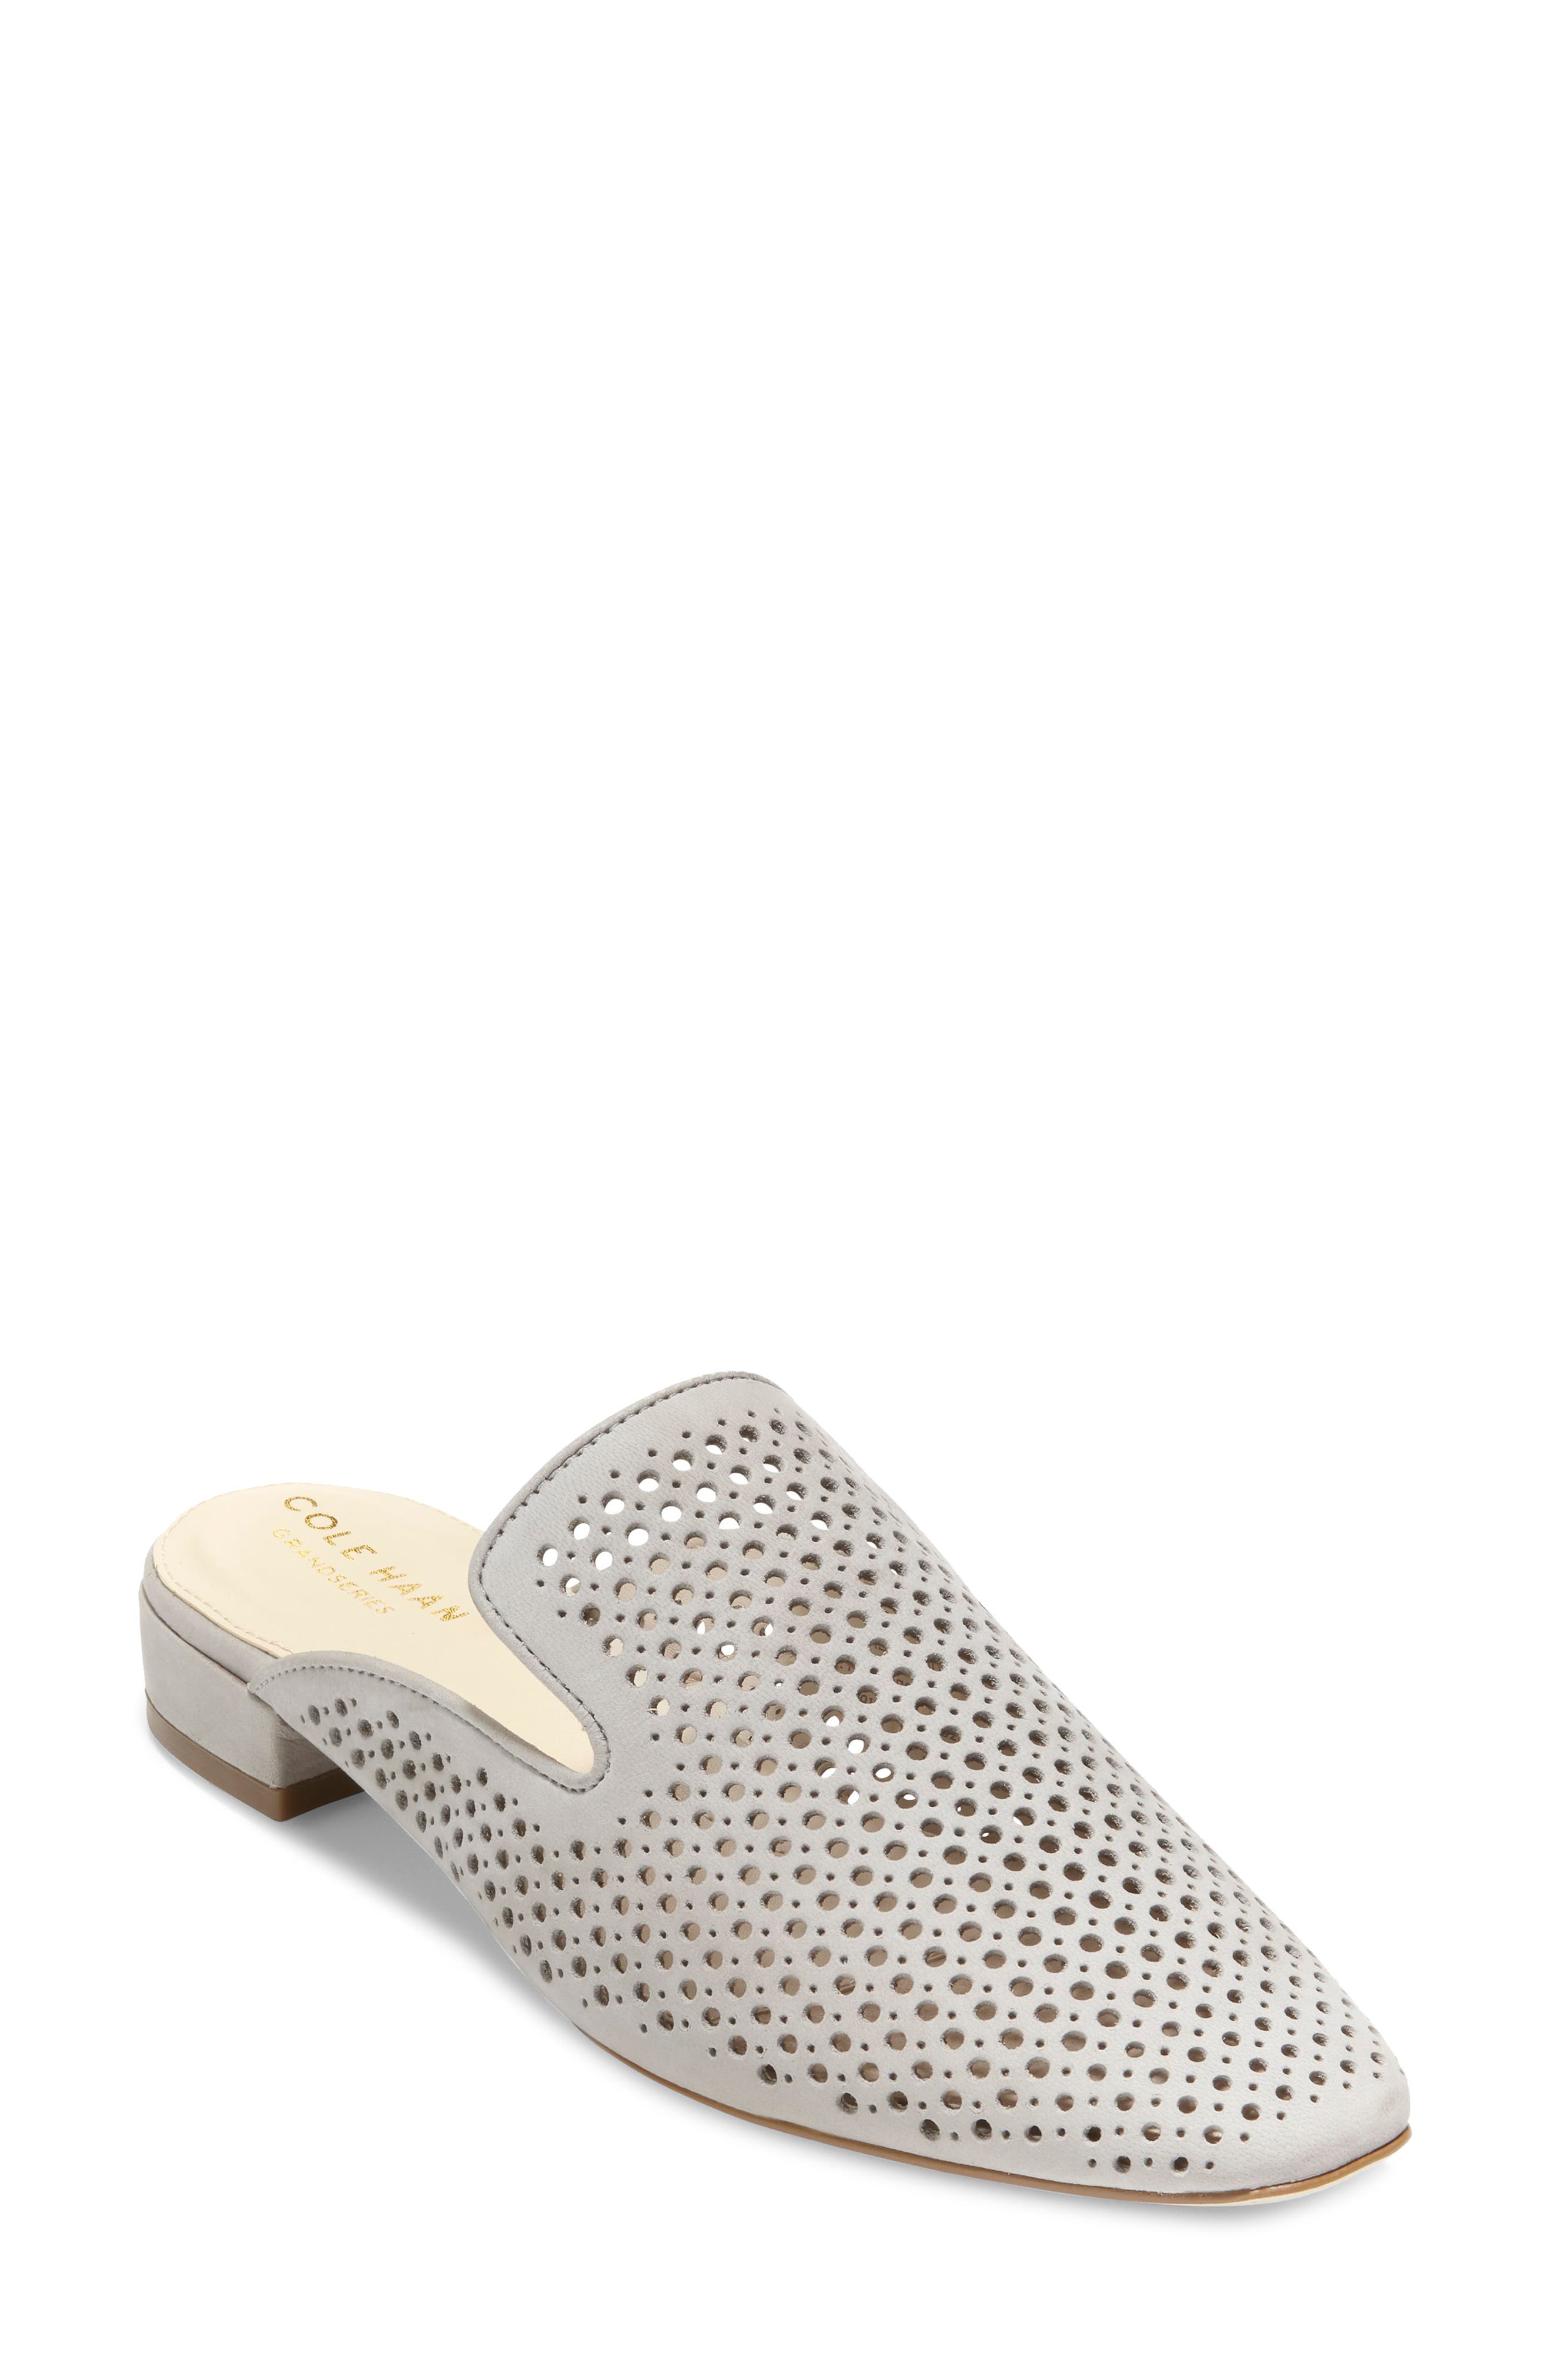 Cole Haan Paula Perforated Loafer Mule 